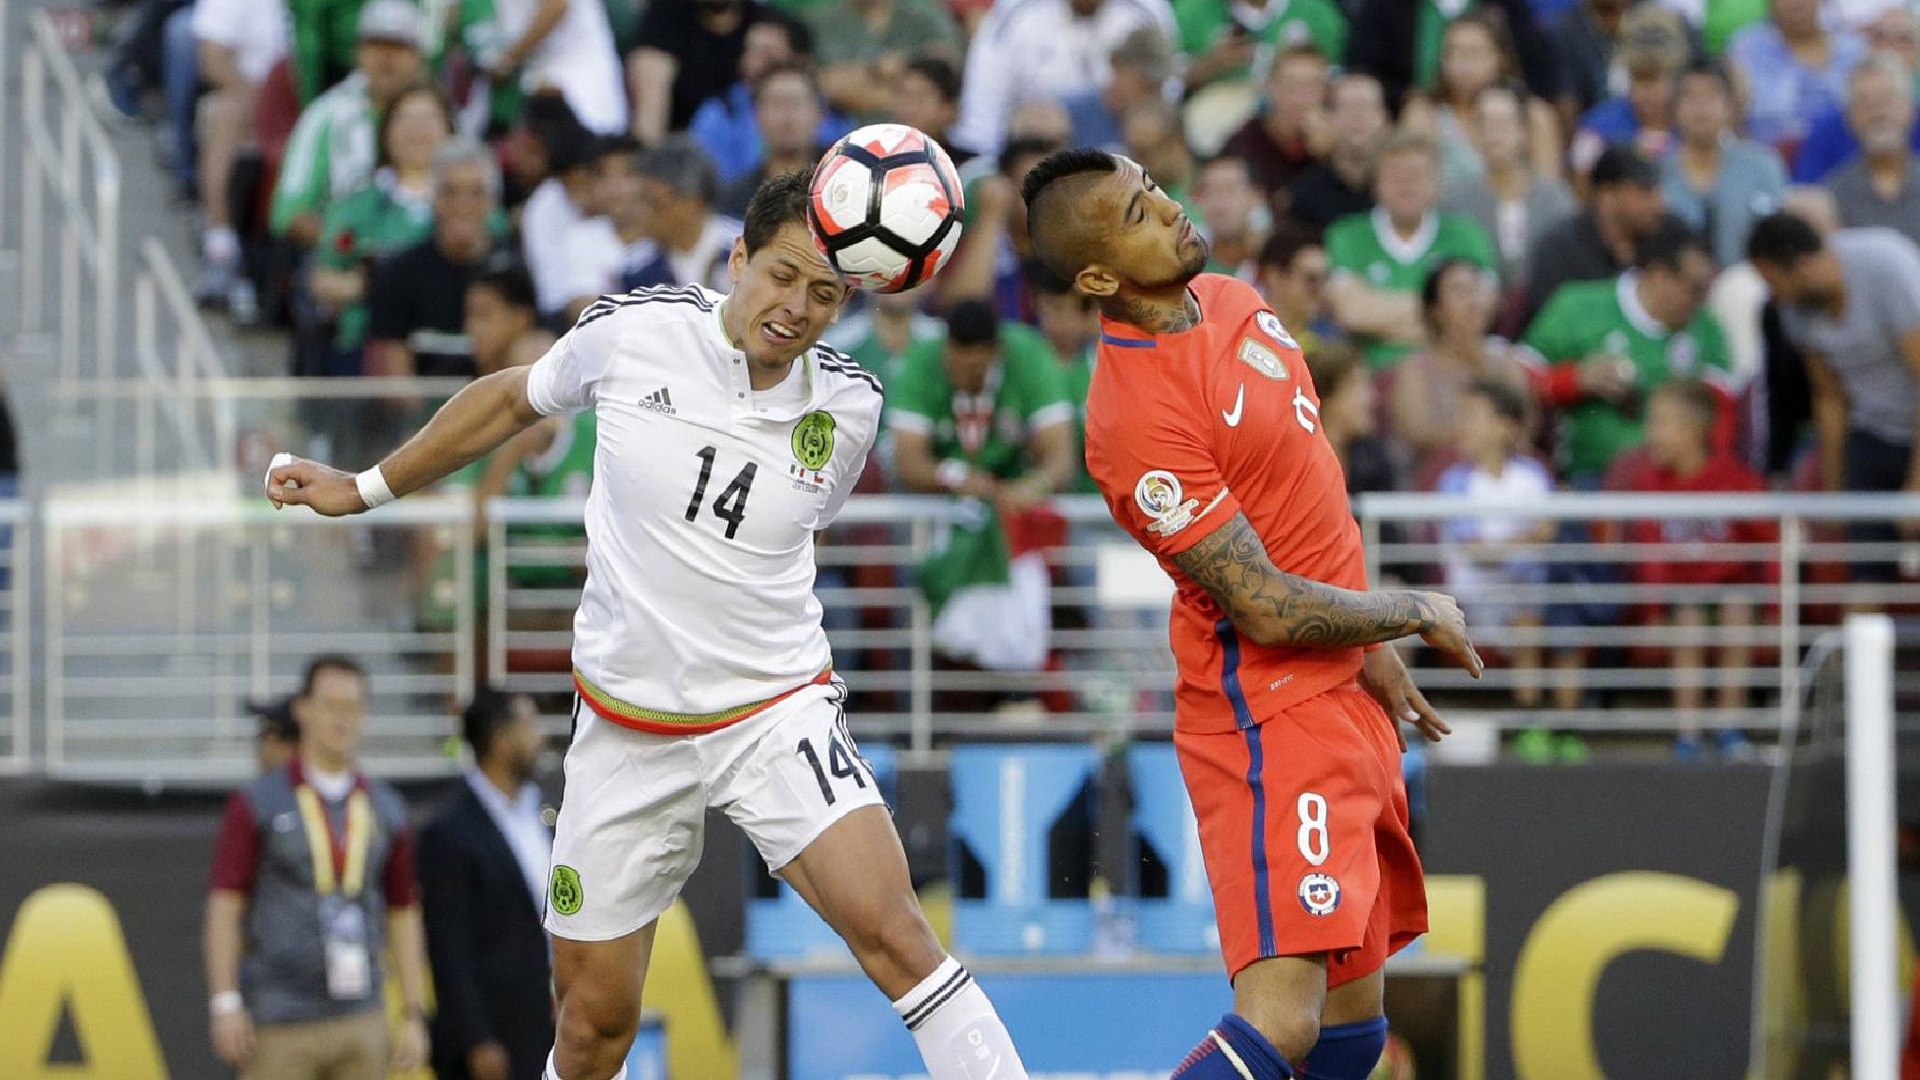 In her latest post, Mexico was crushed by Chile (Image: Associated Press)